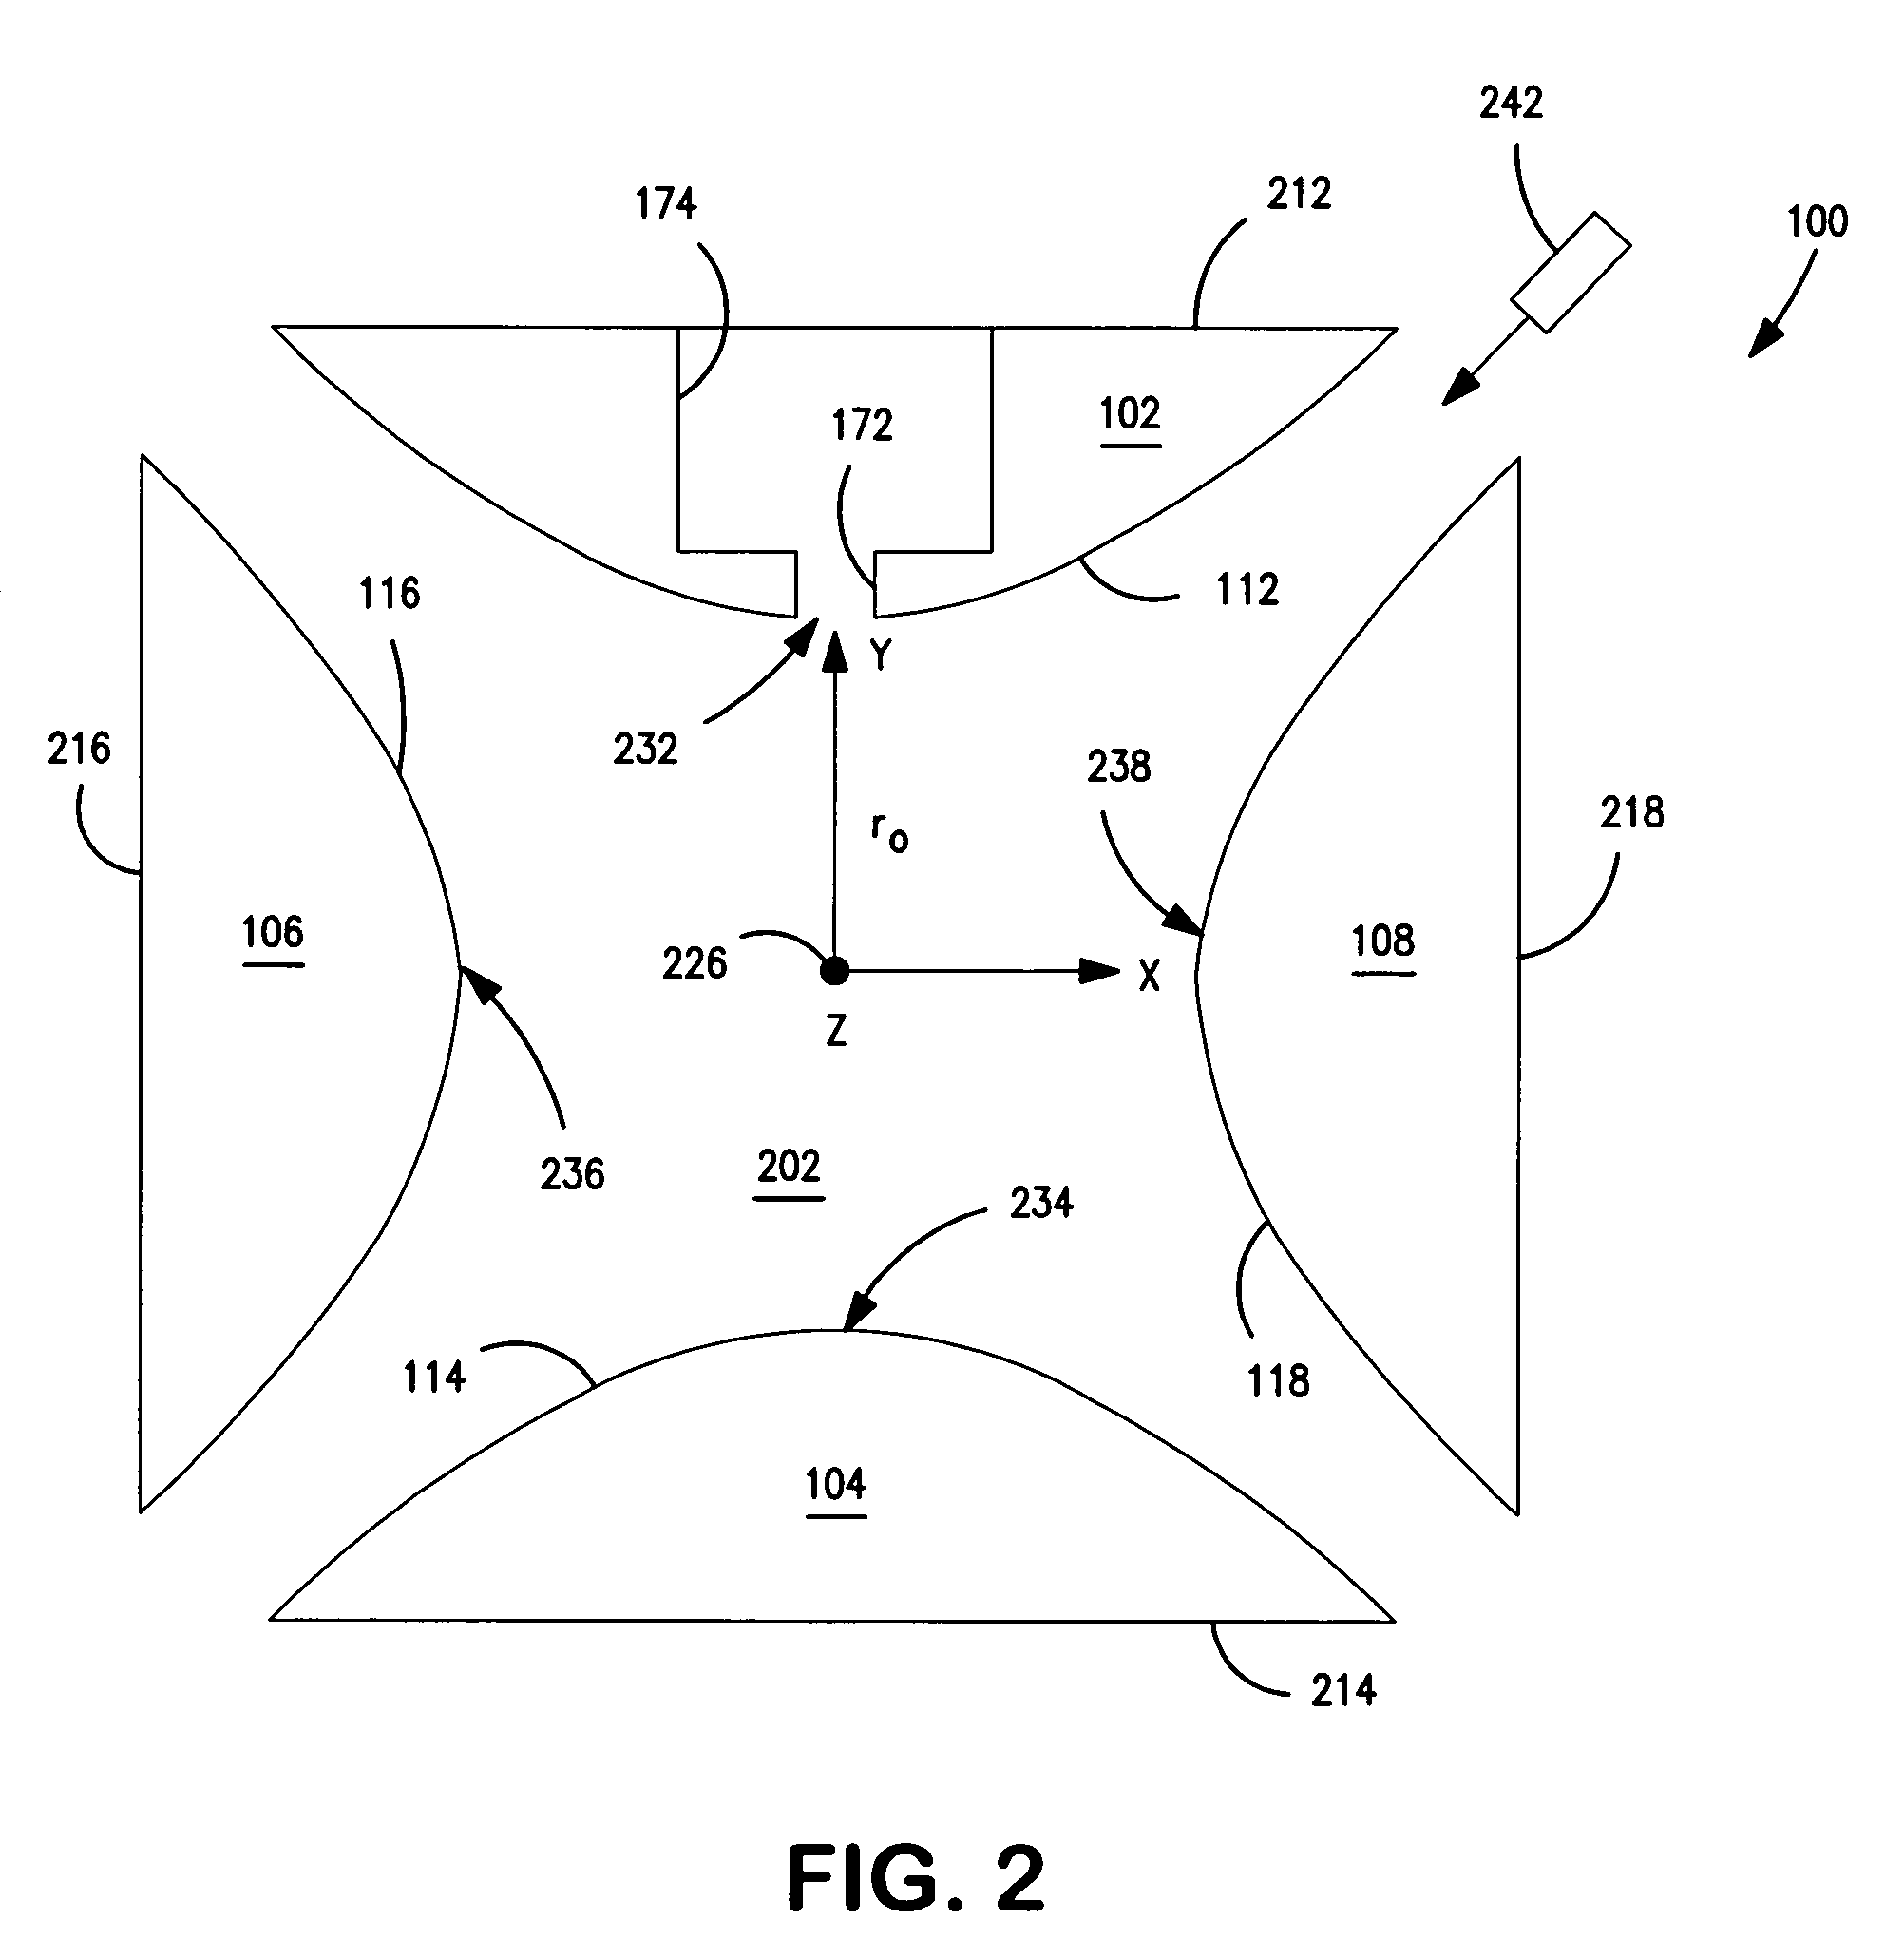 Adjusting field conditions in linear ion processing apparatus for different modes of operation